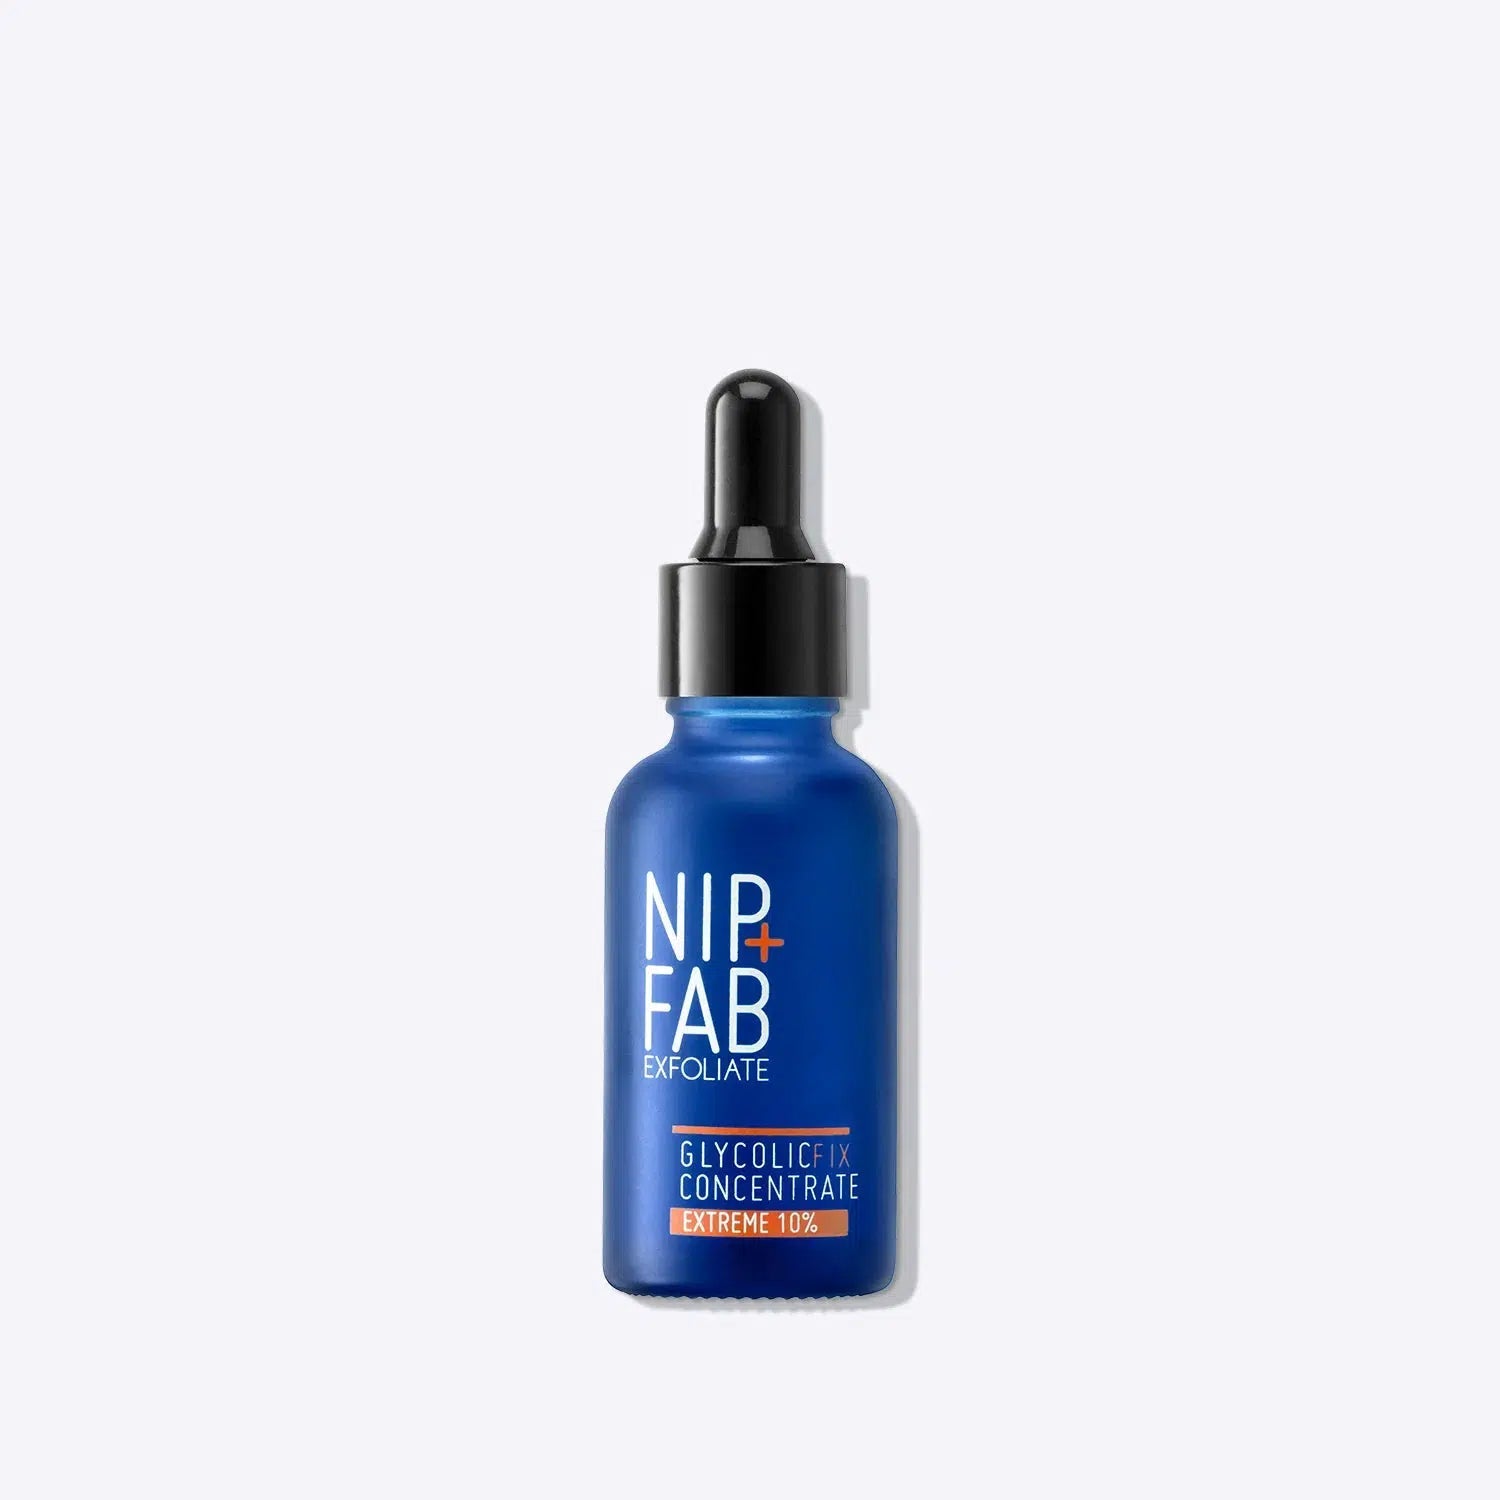 NIP + FAB GLYCOLIC CONCENTRATE BOOSTER 10%